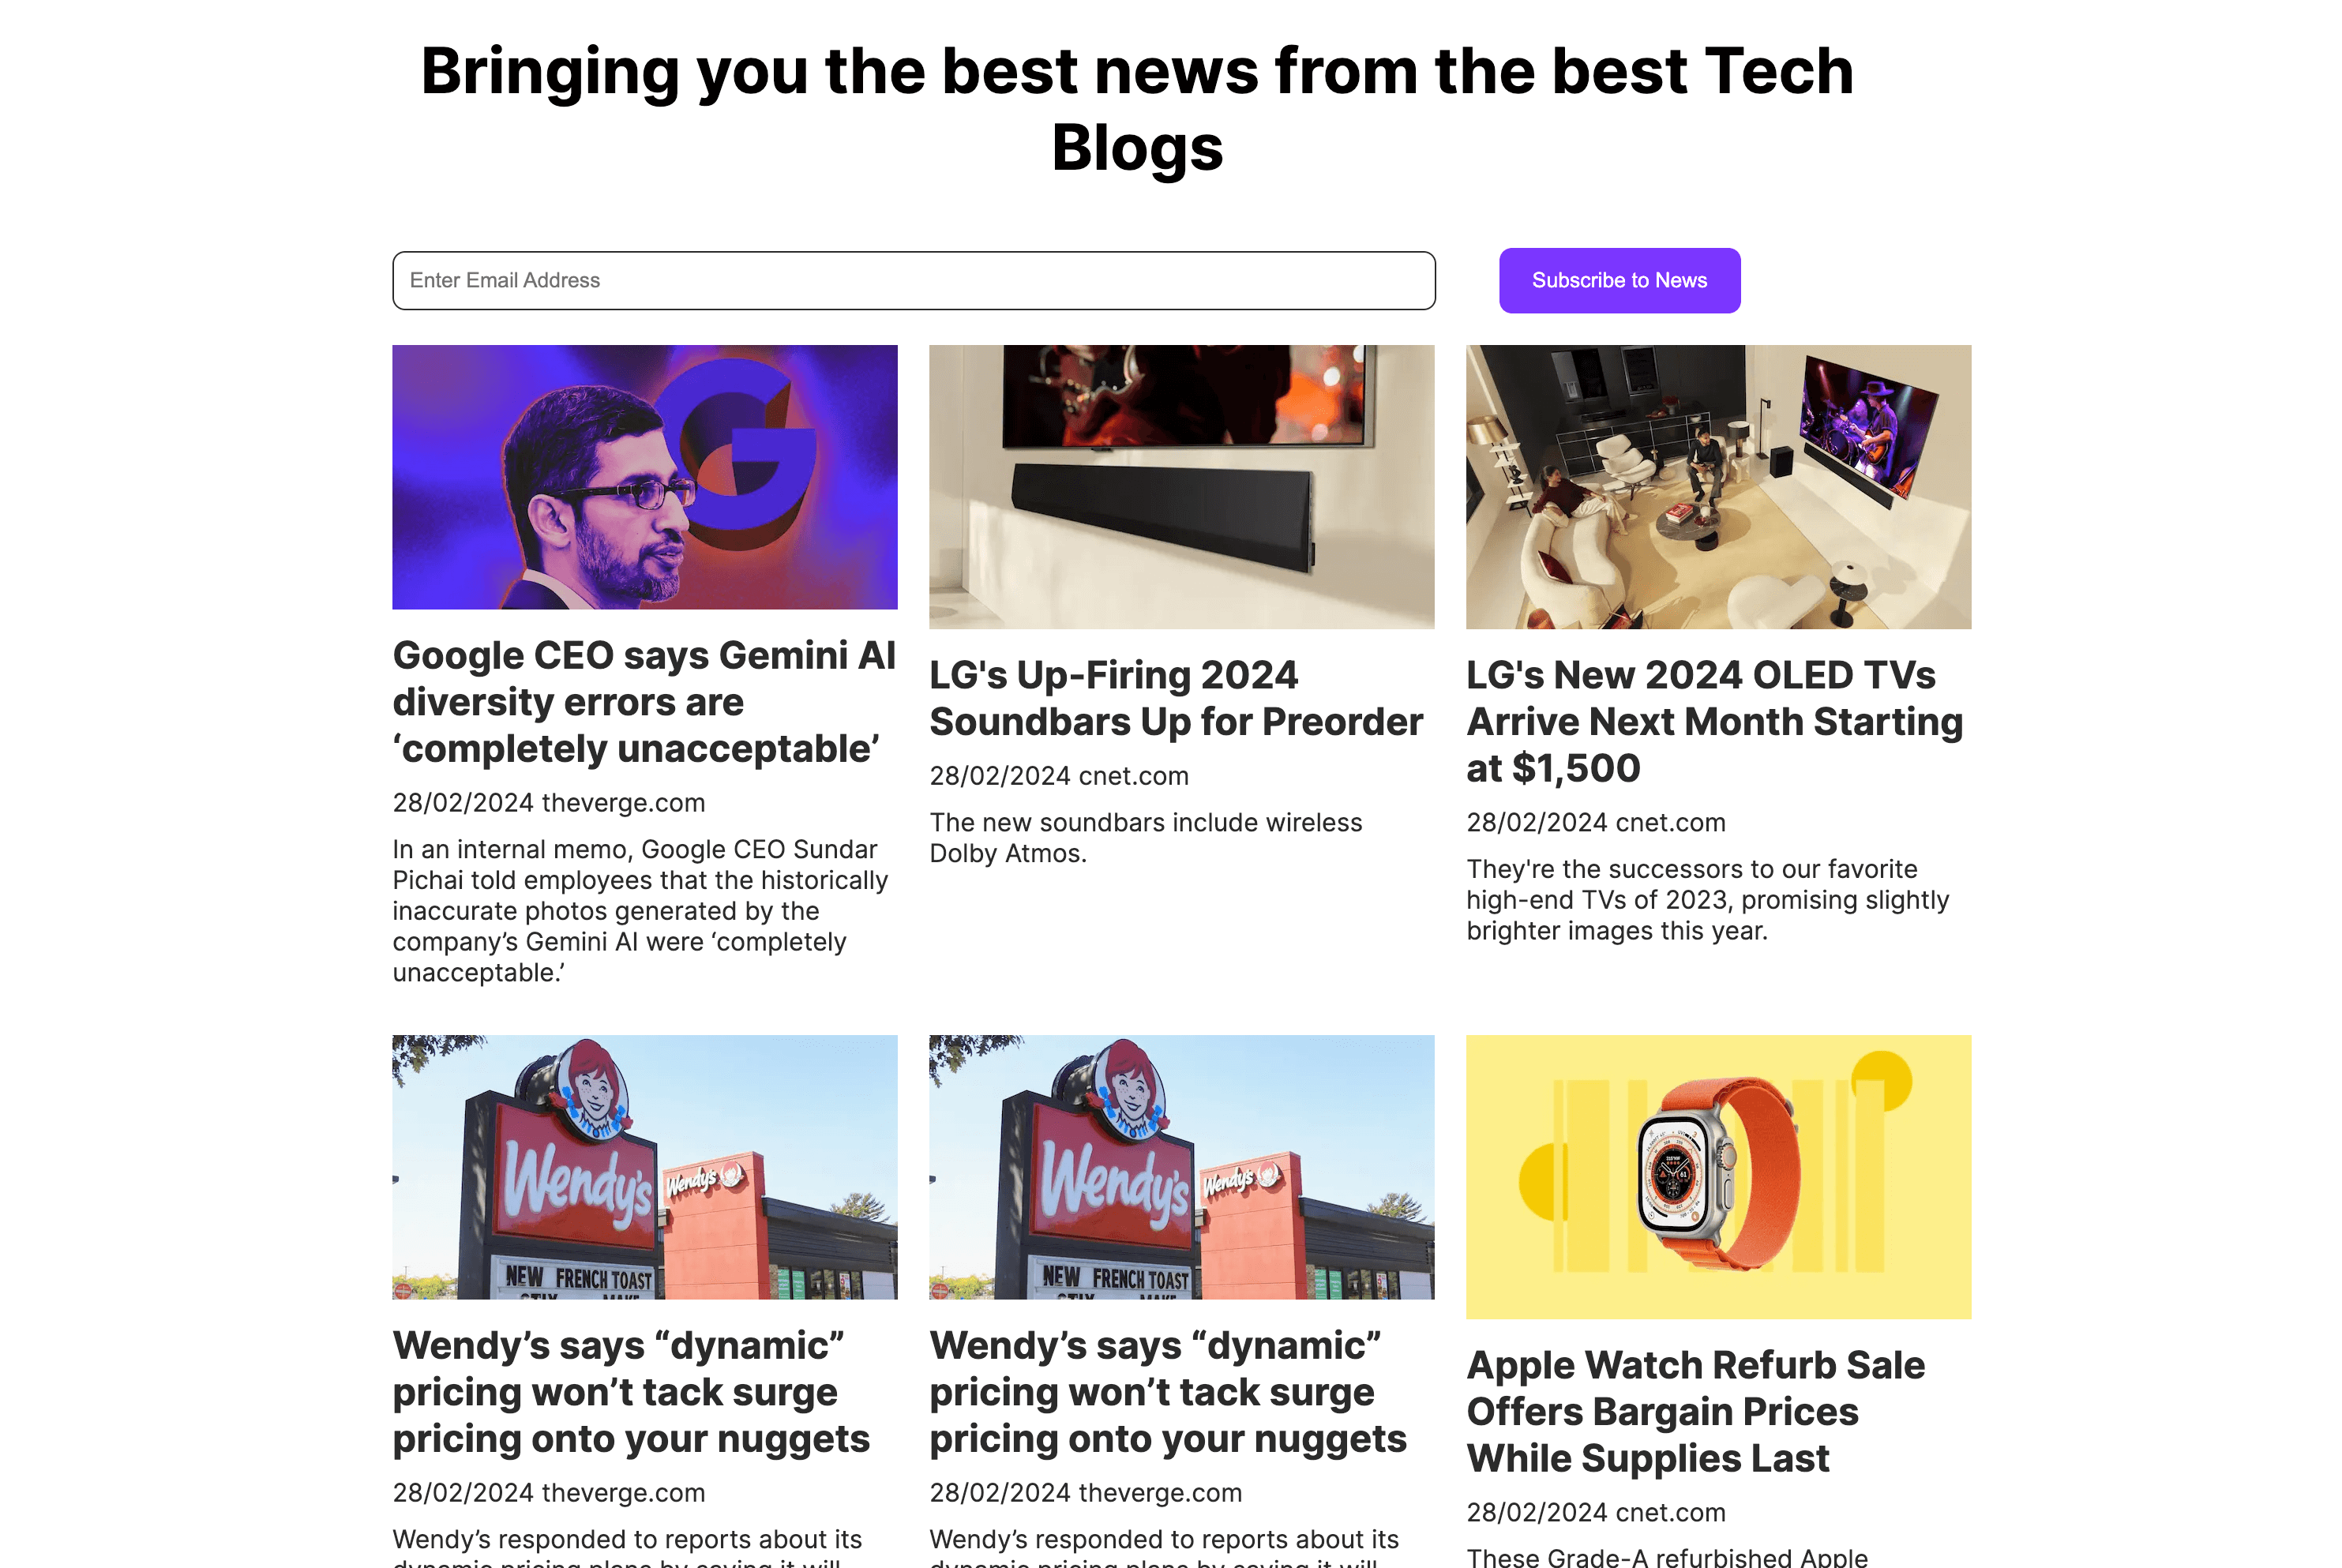 How to build a news aggregator - final example